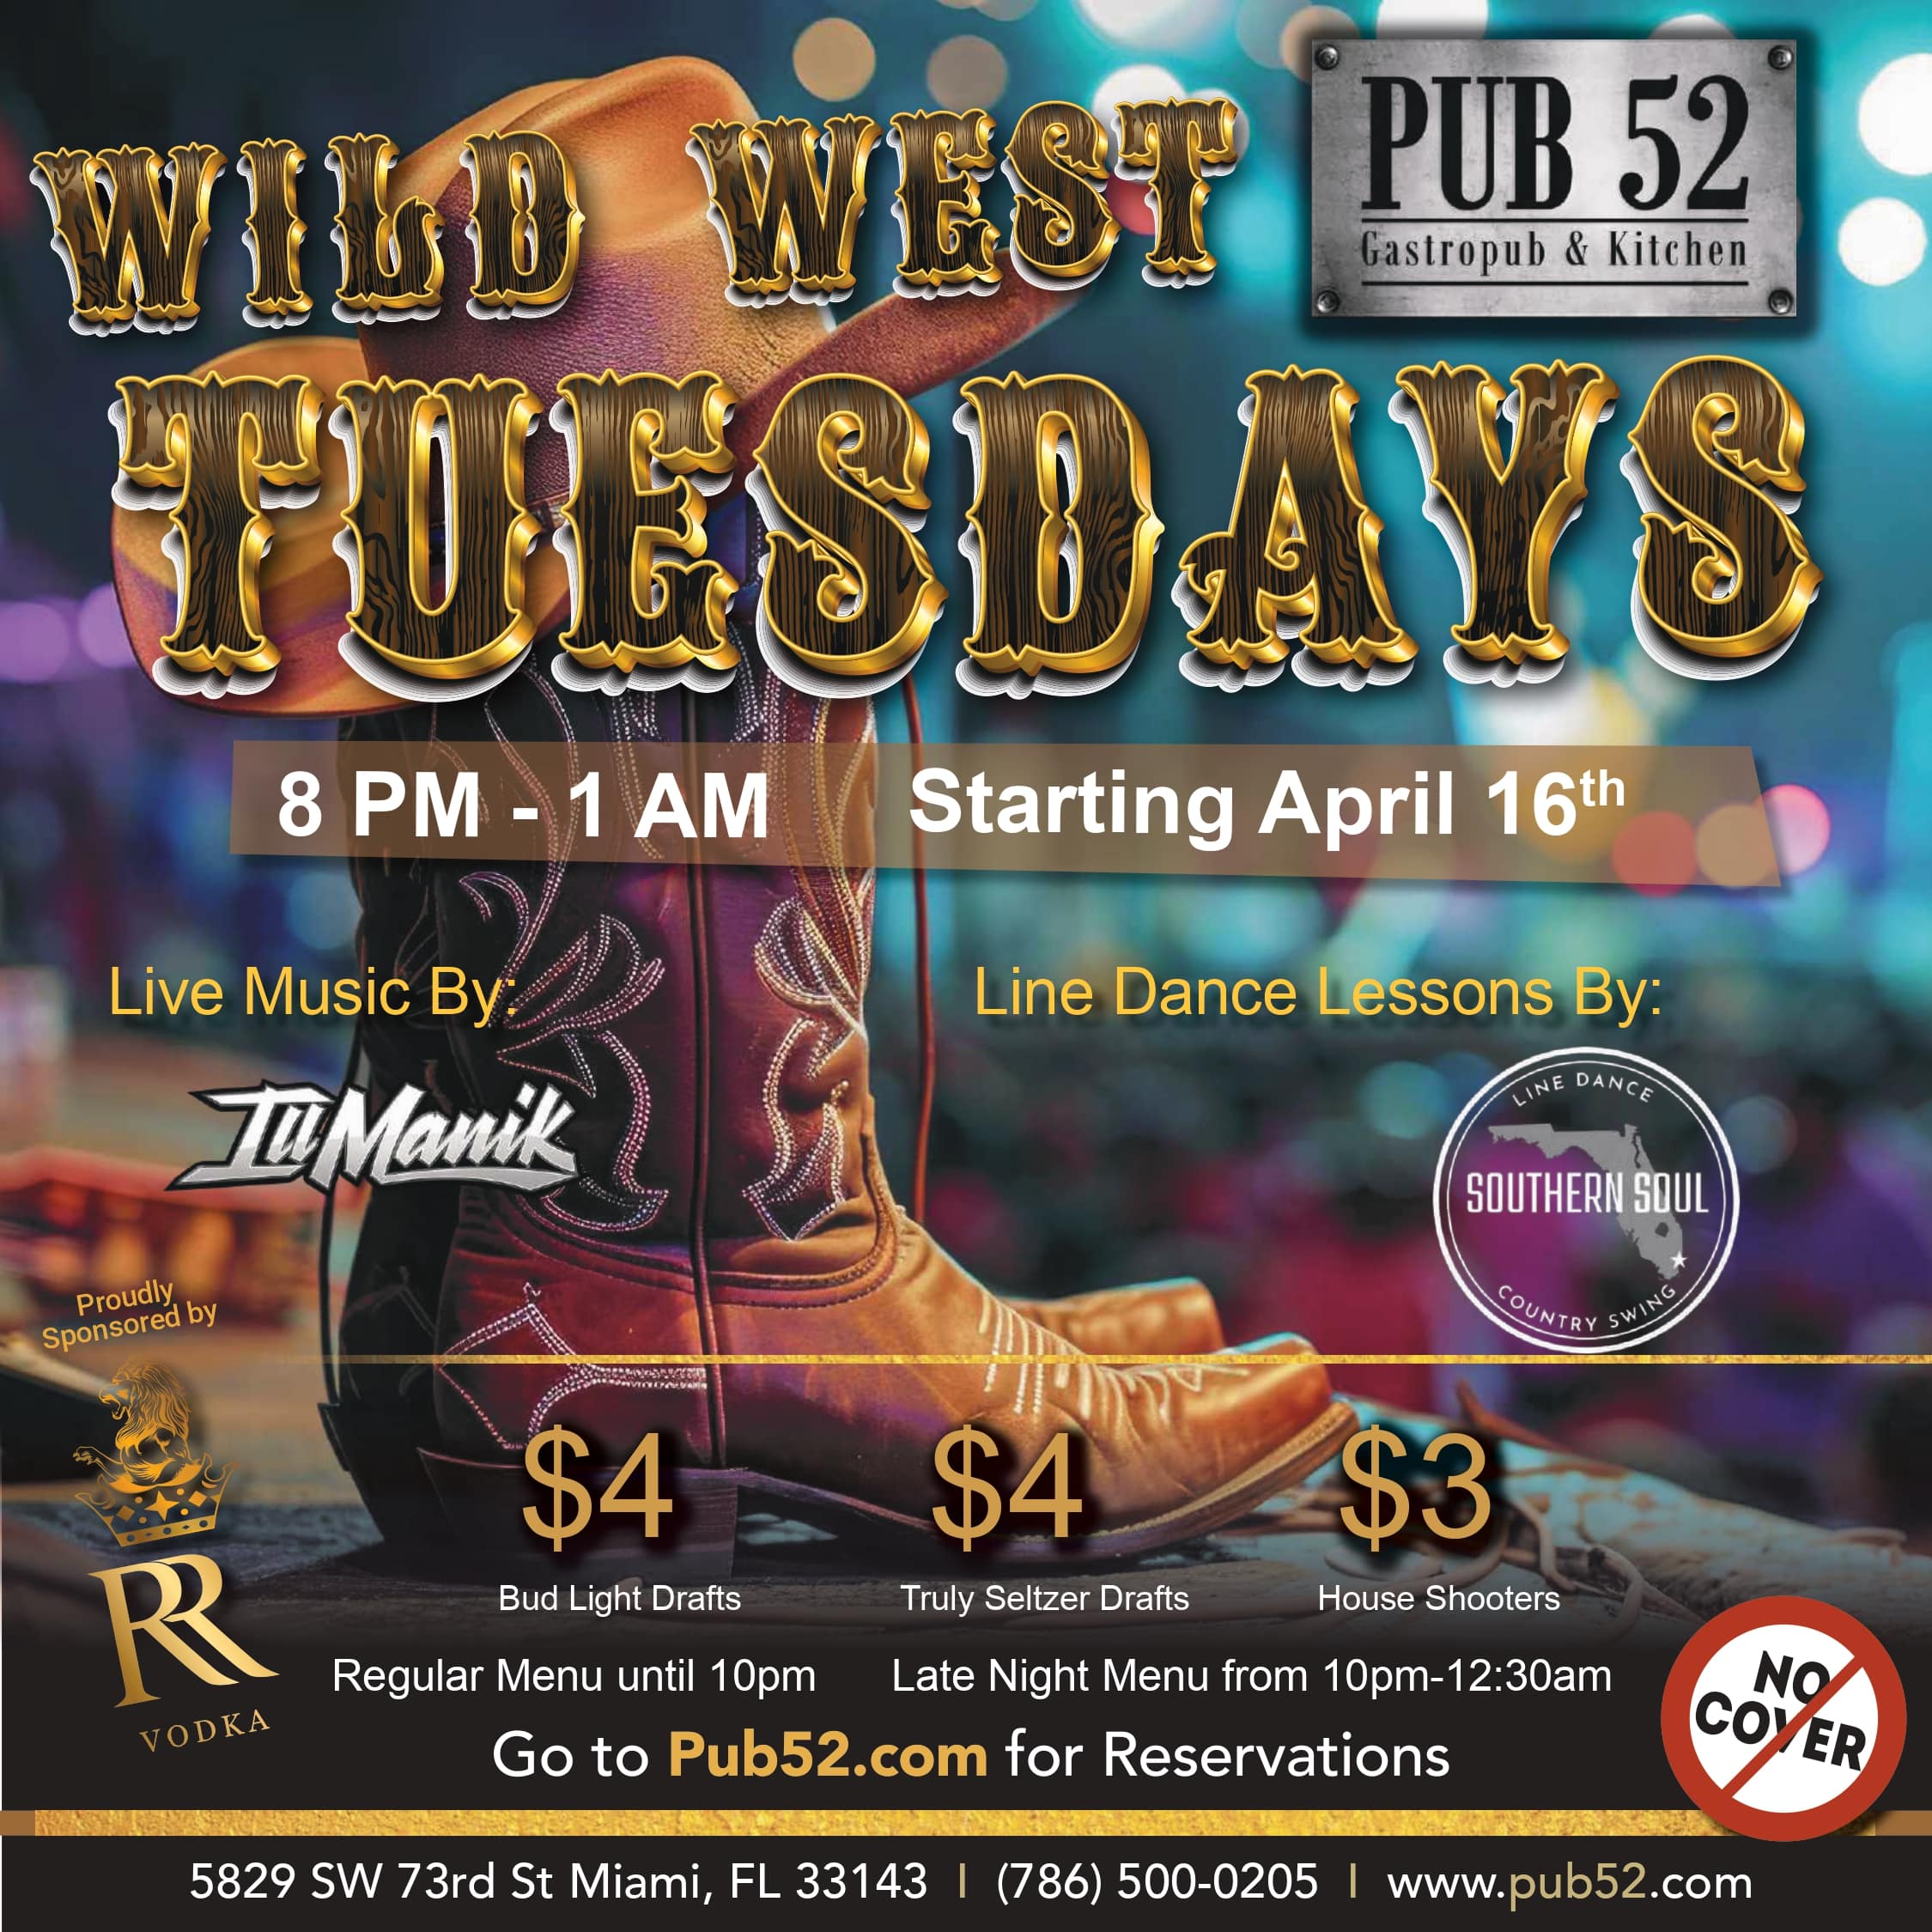 Pub52_Square_WildWest_Tuesdays_V3_compressed-compressed_page-0001-min